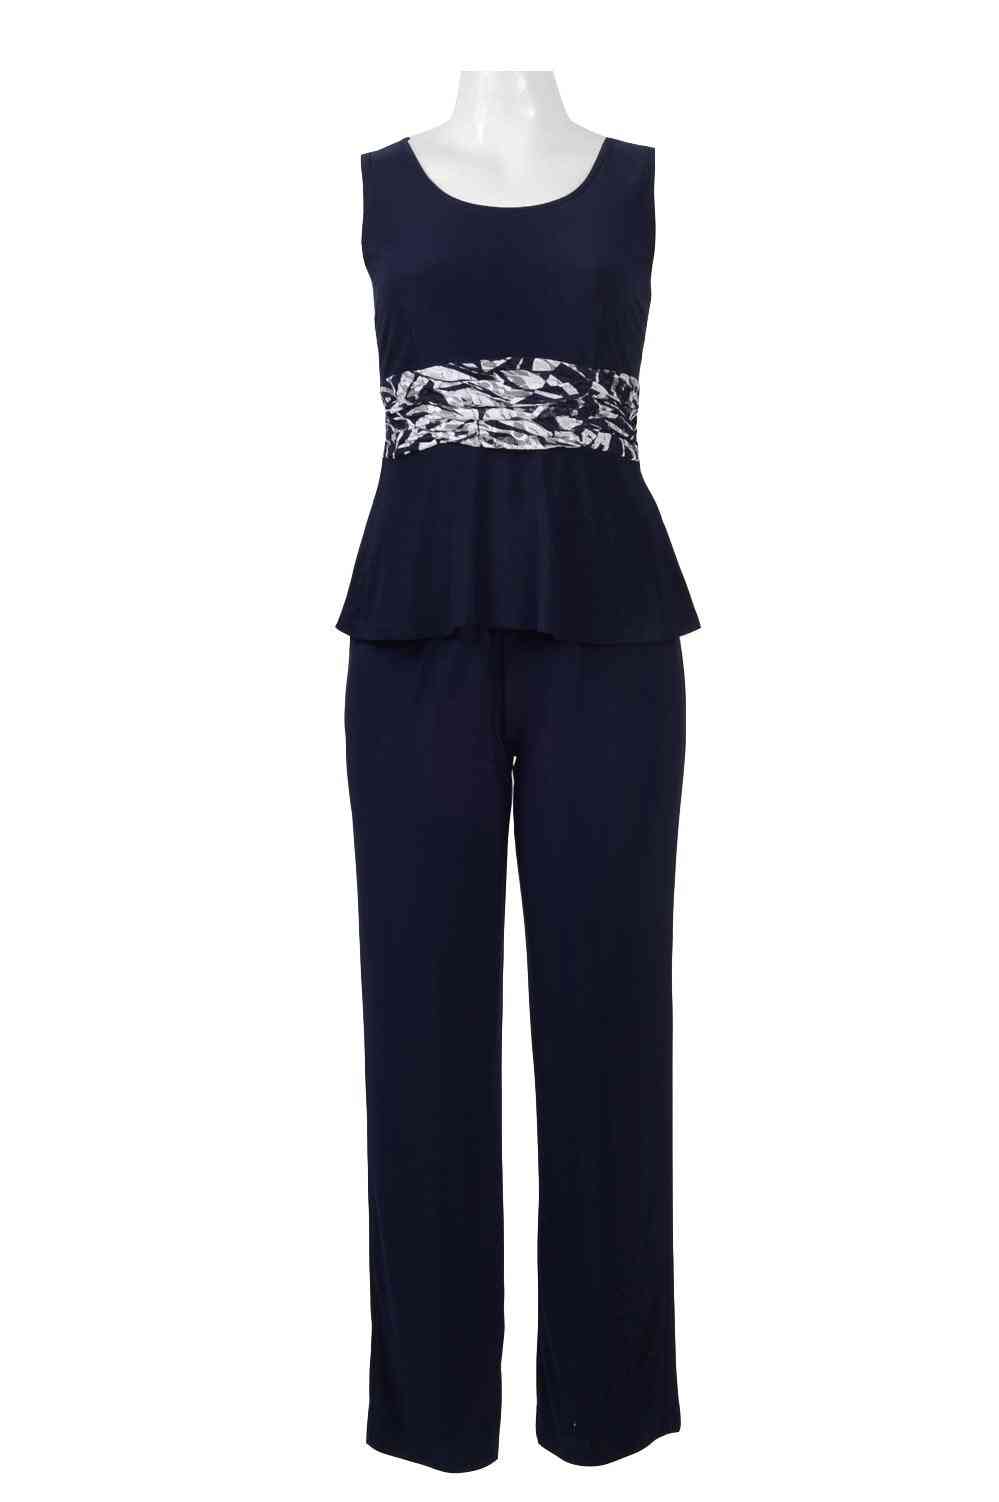 O-neck Sleeveless Popover Jersey Jumpsuit With Lace